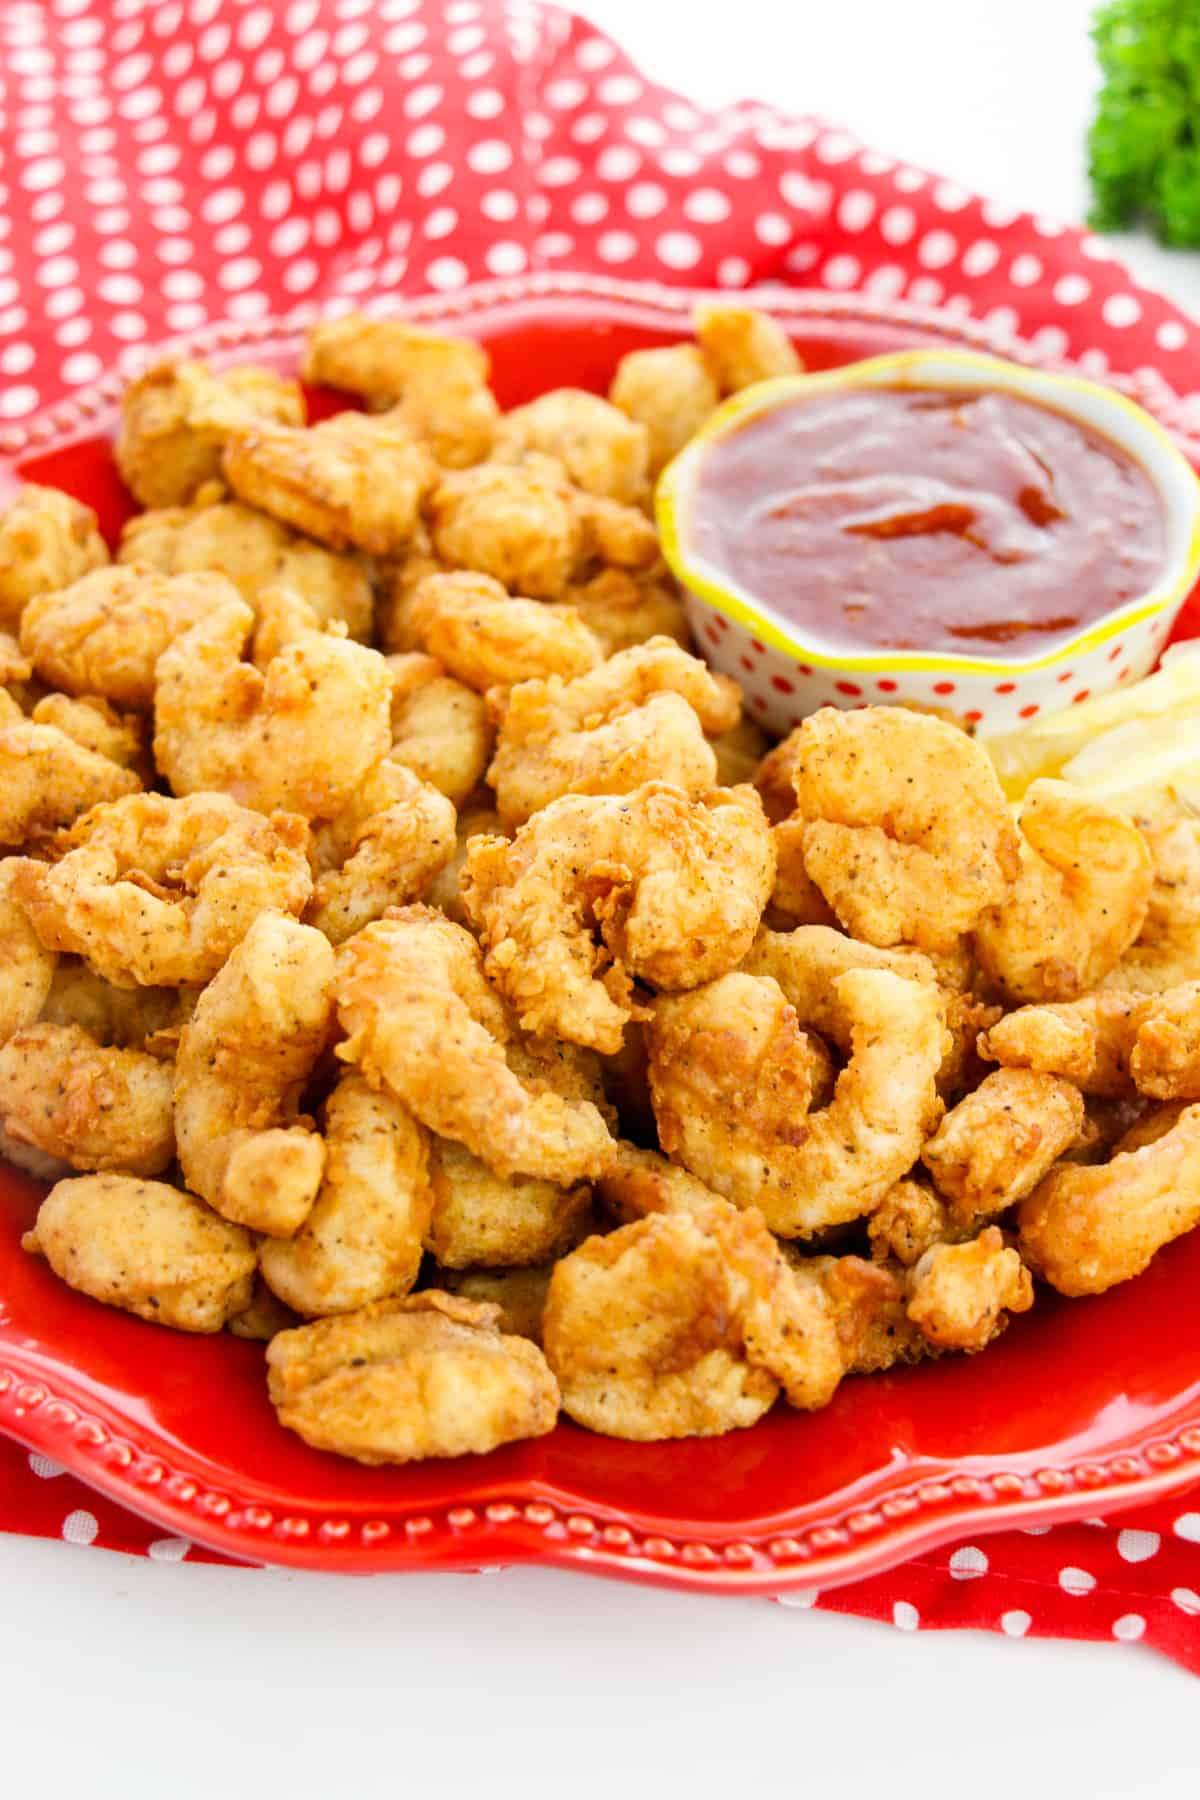 Popcorn shrimp with cup of cocktail sauce on red plate with red cloth napkin in the background